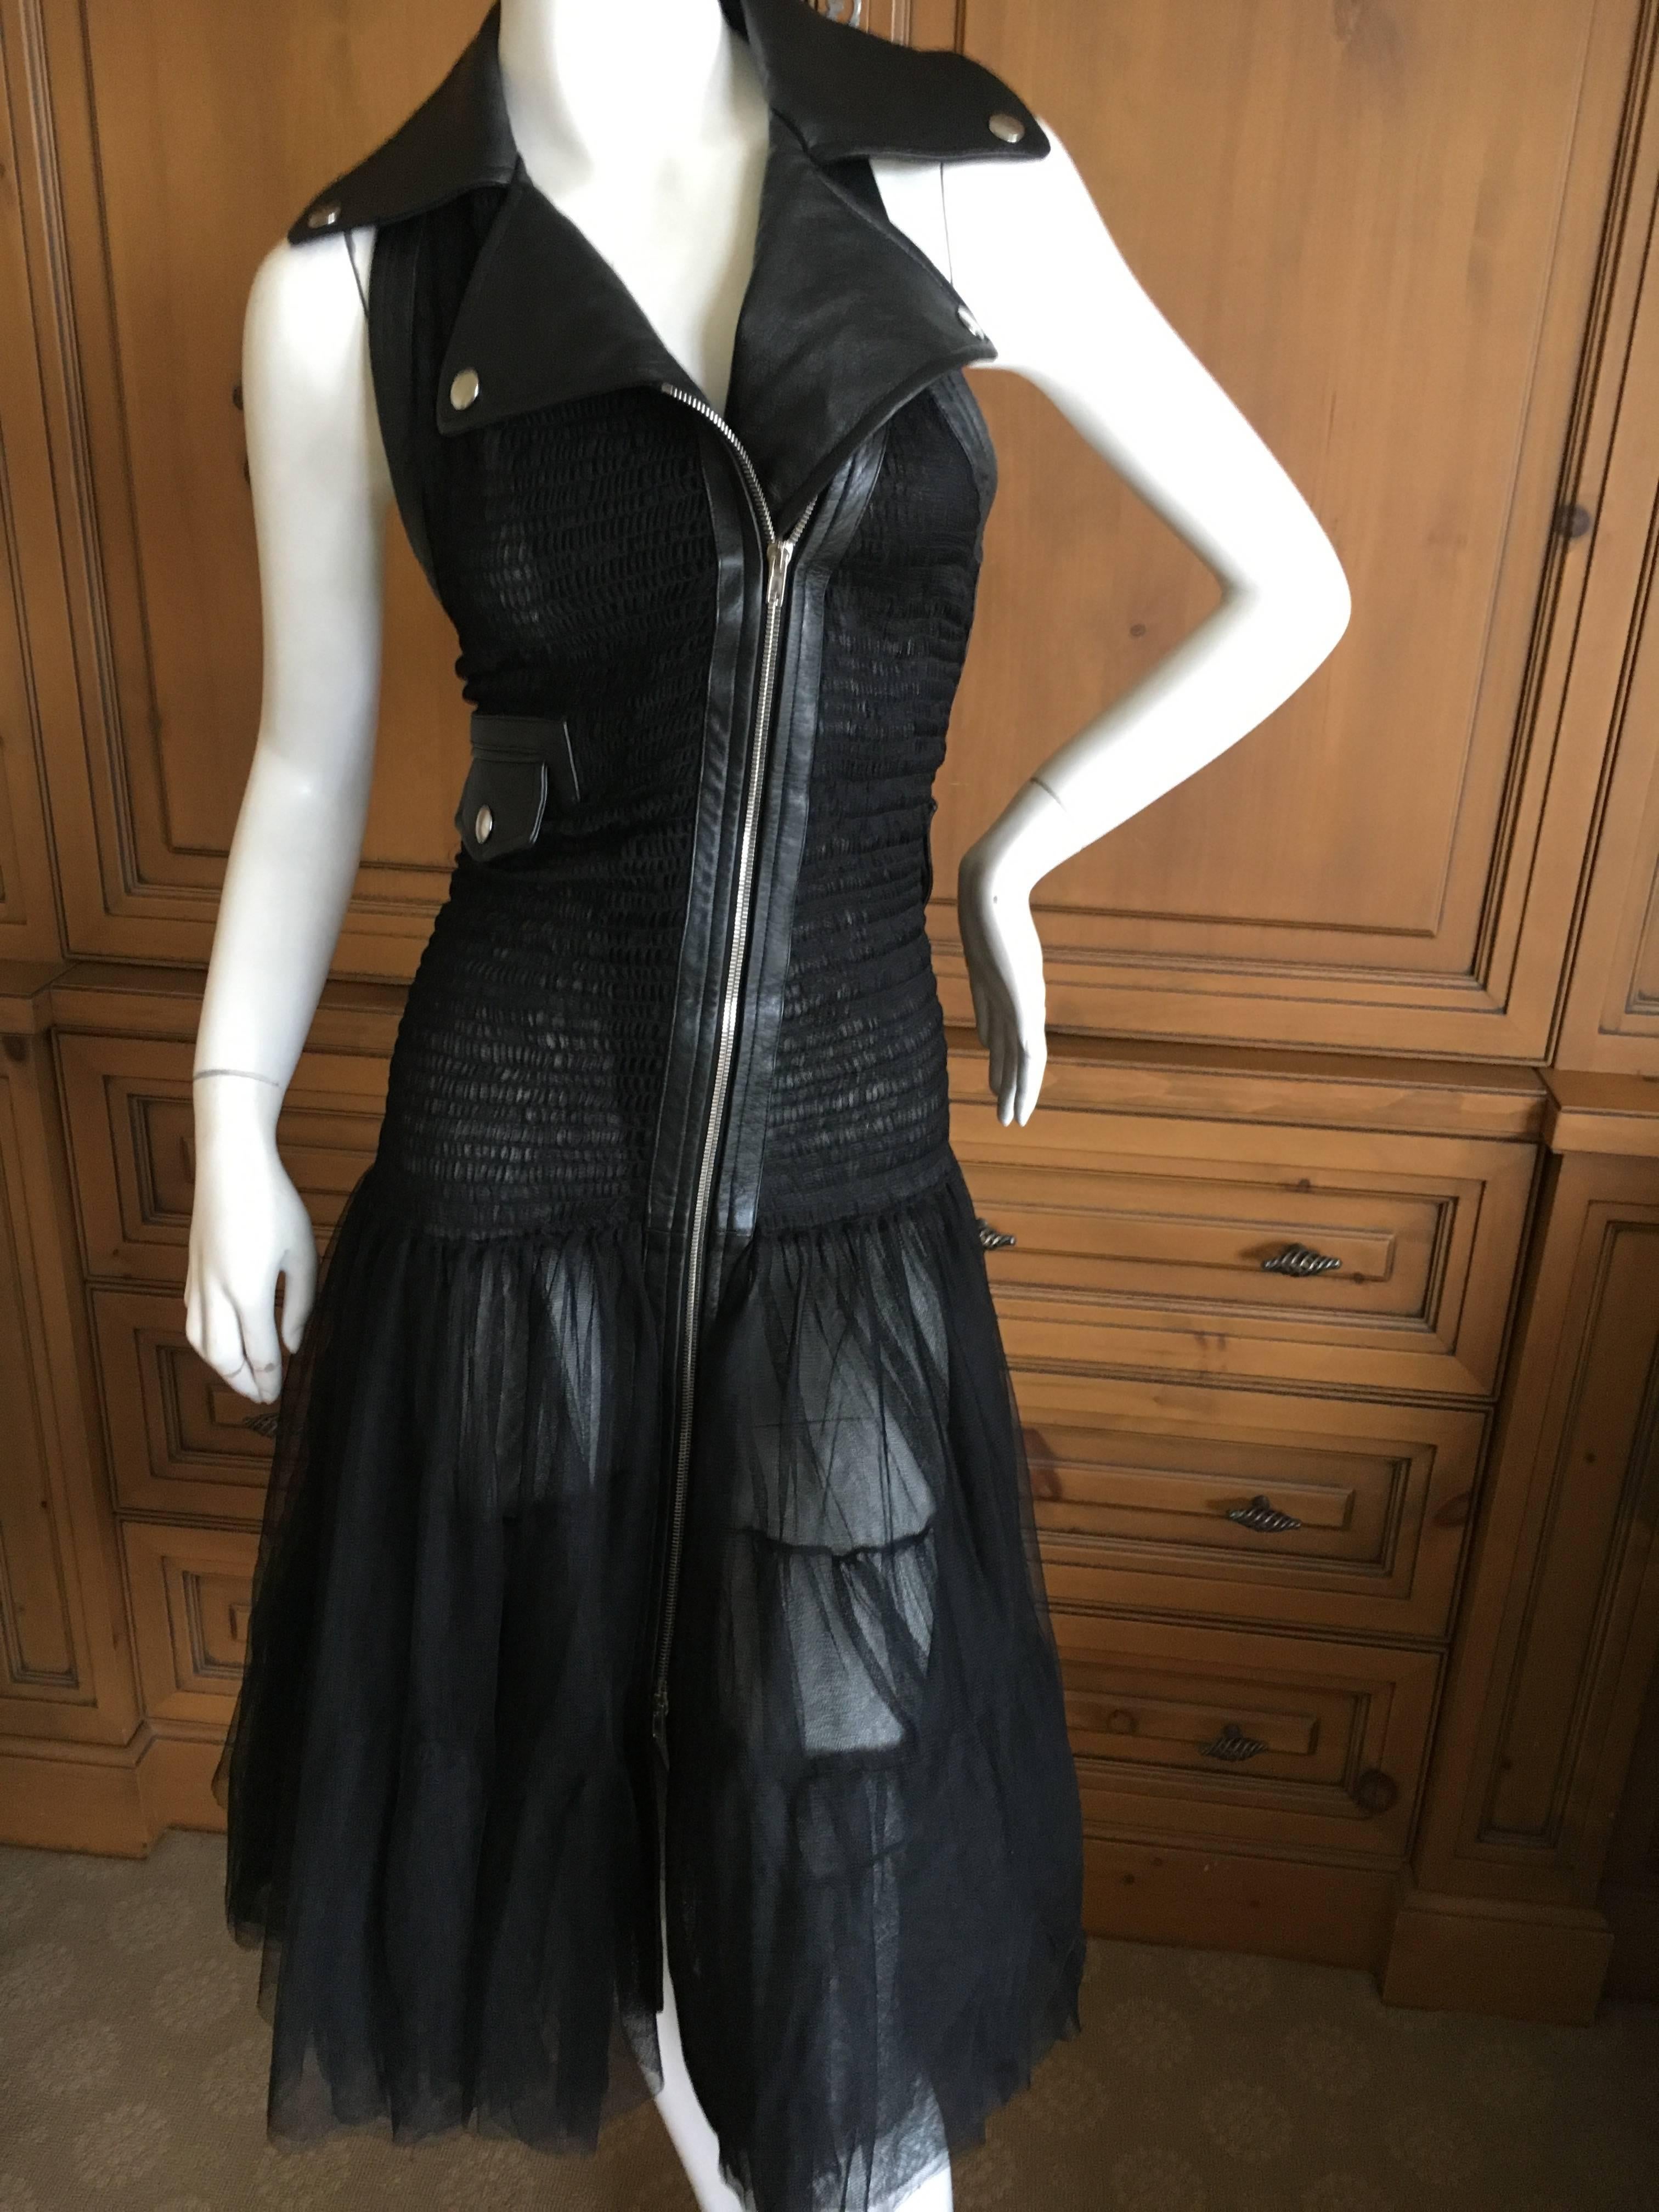 Jean Paul Gaultier Sheer Black Leather Trimmed Moto Style Dress.
Styled like a leather moto jacket but with sheer ruched and pleated fabric.
This is so pretty on, the photo's don't quite capture it.
Size 42
Bust 39"
Waist 30"
Hips